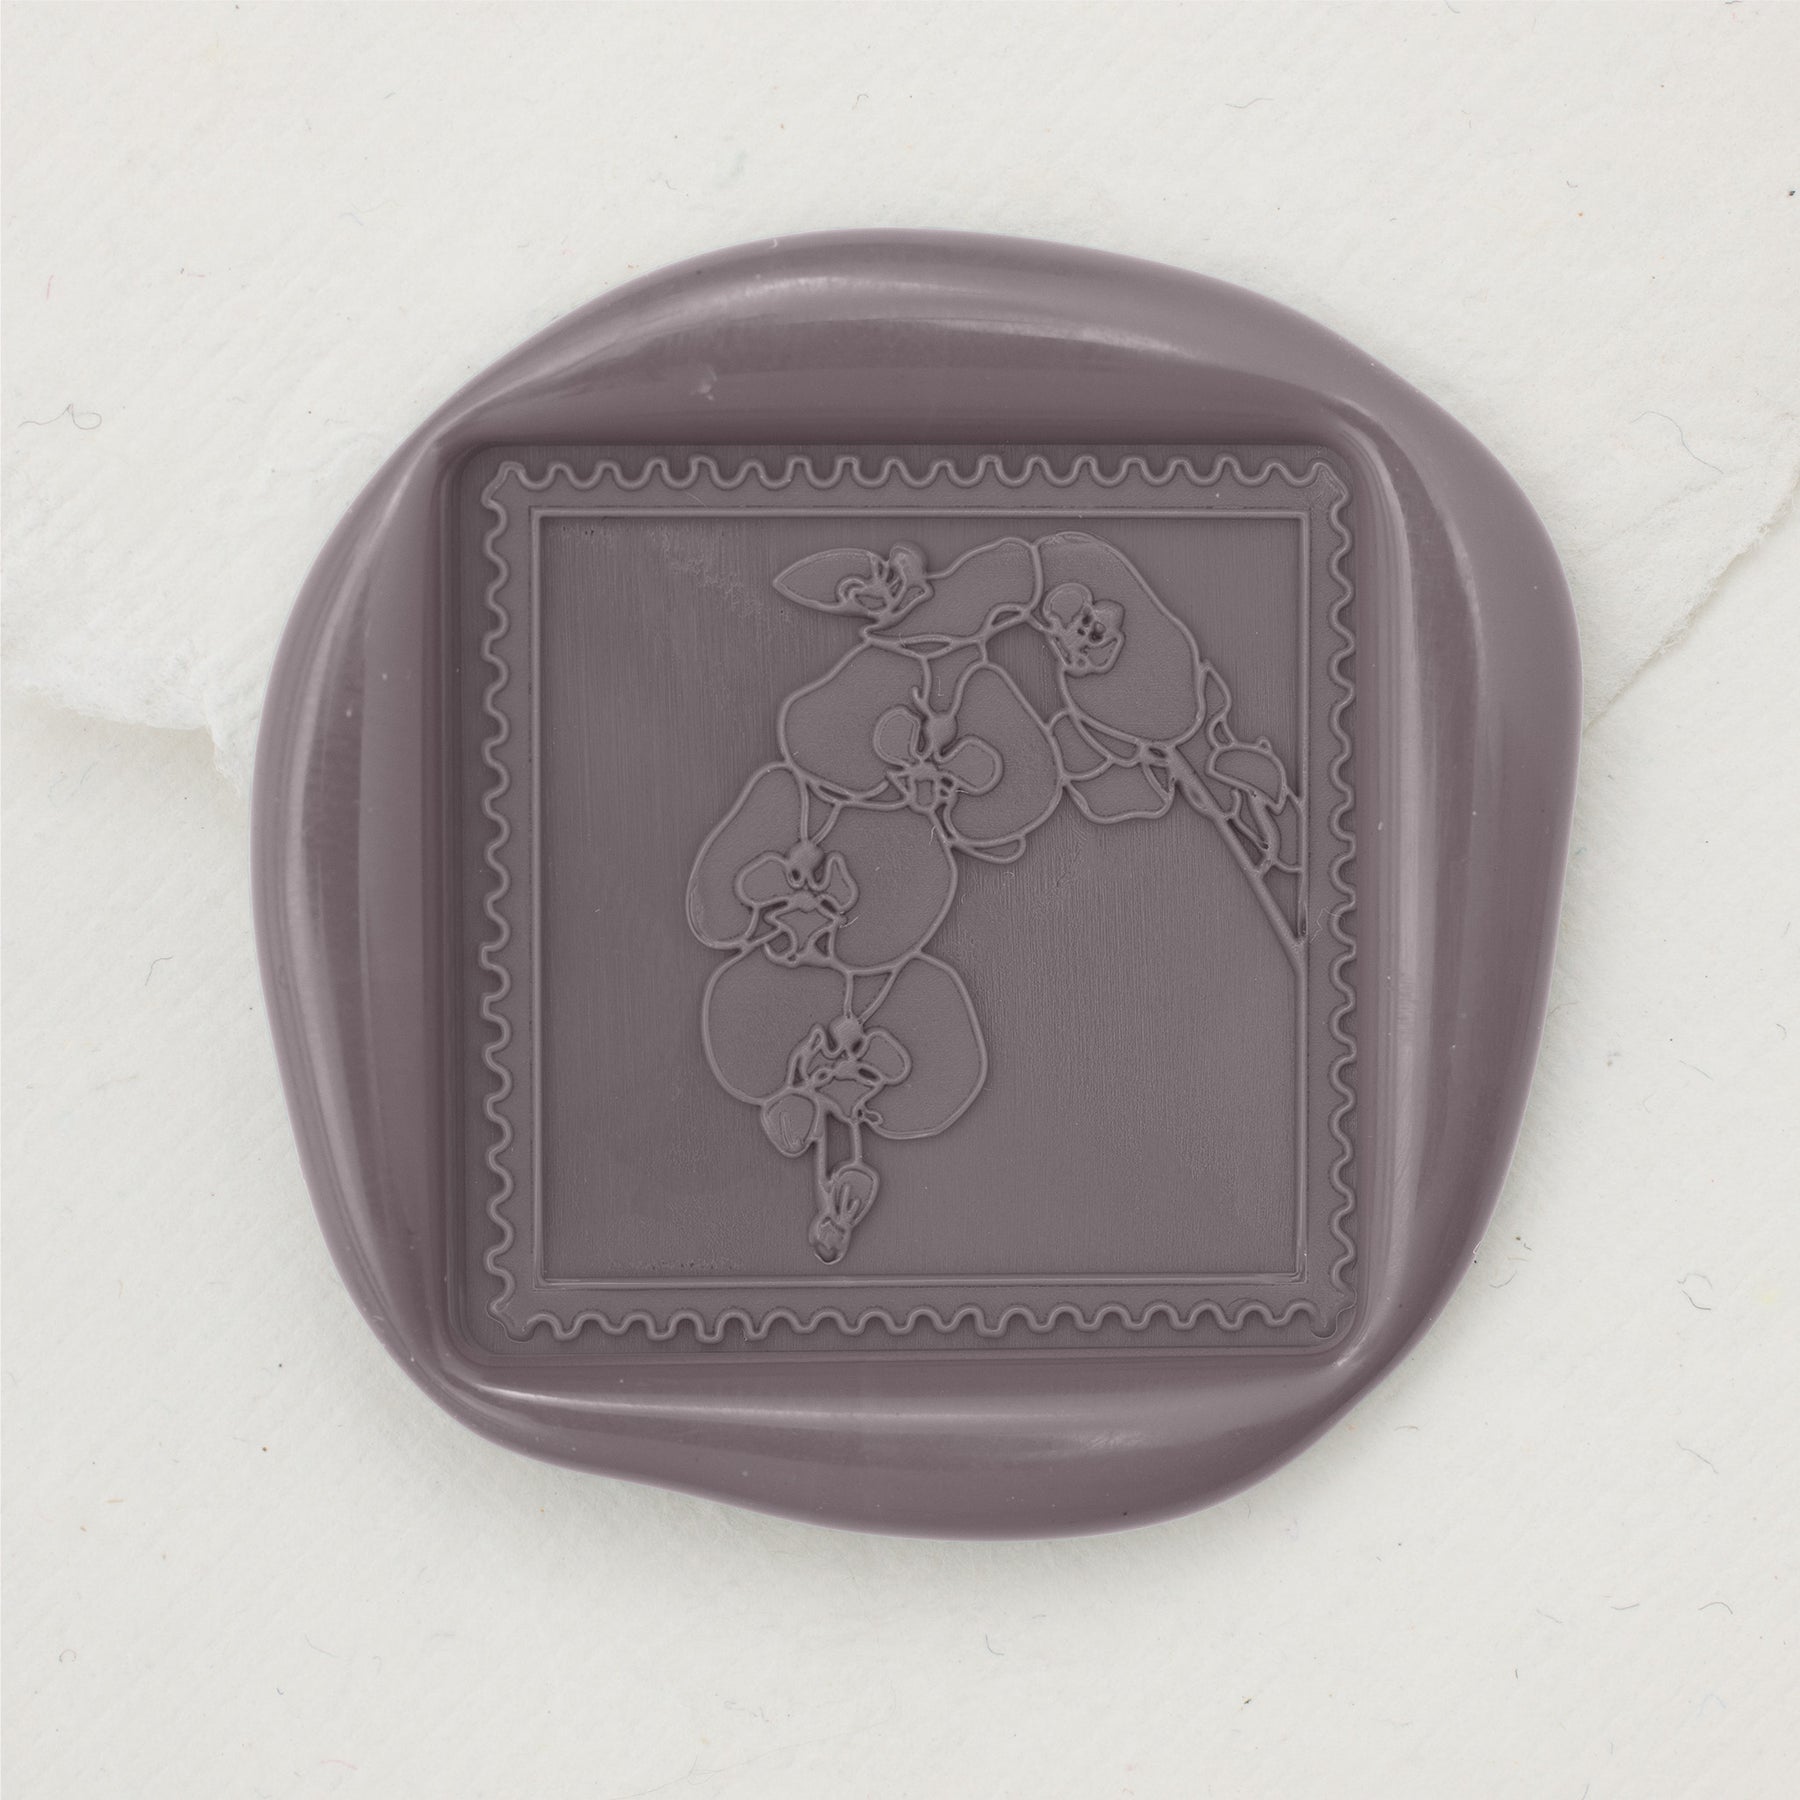 Orchid Airmail Wax Seals